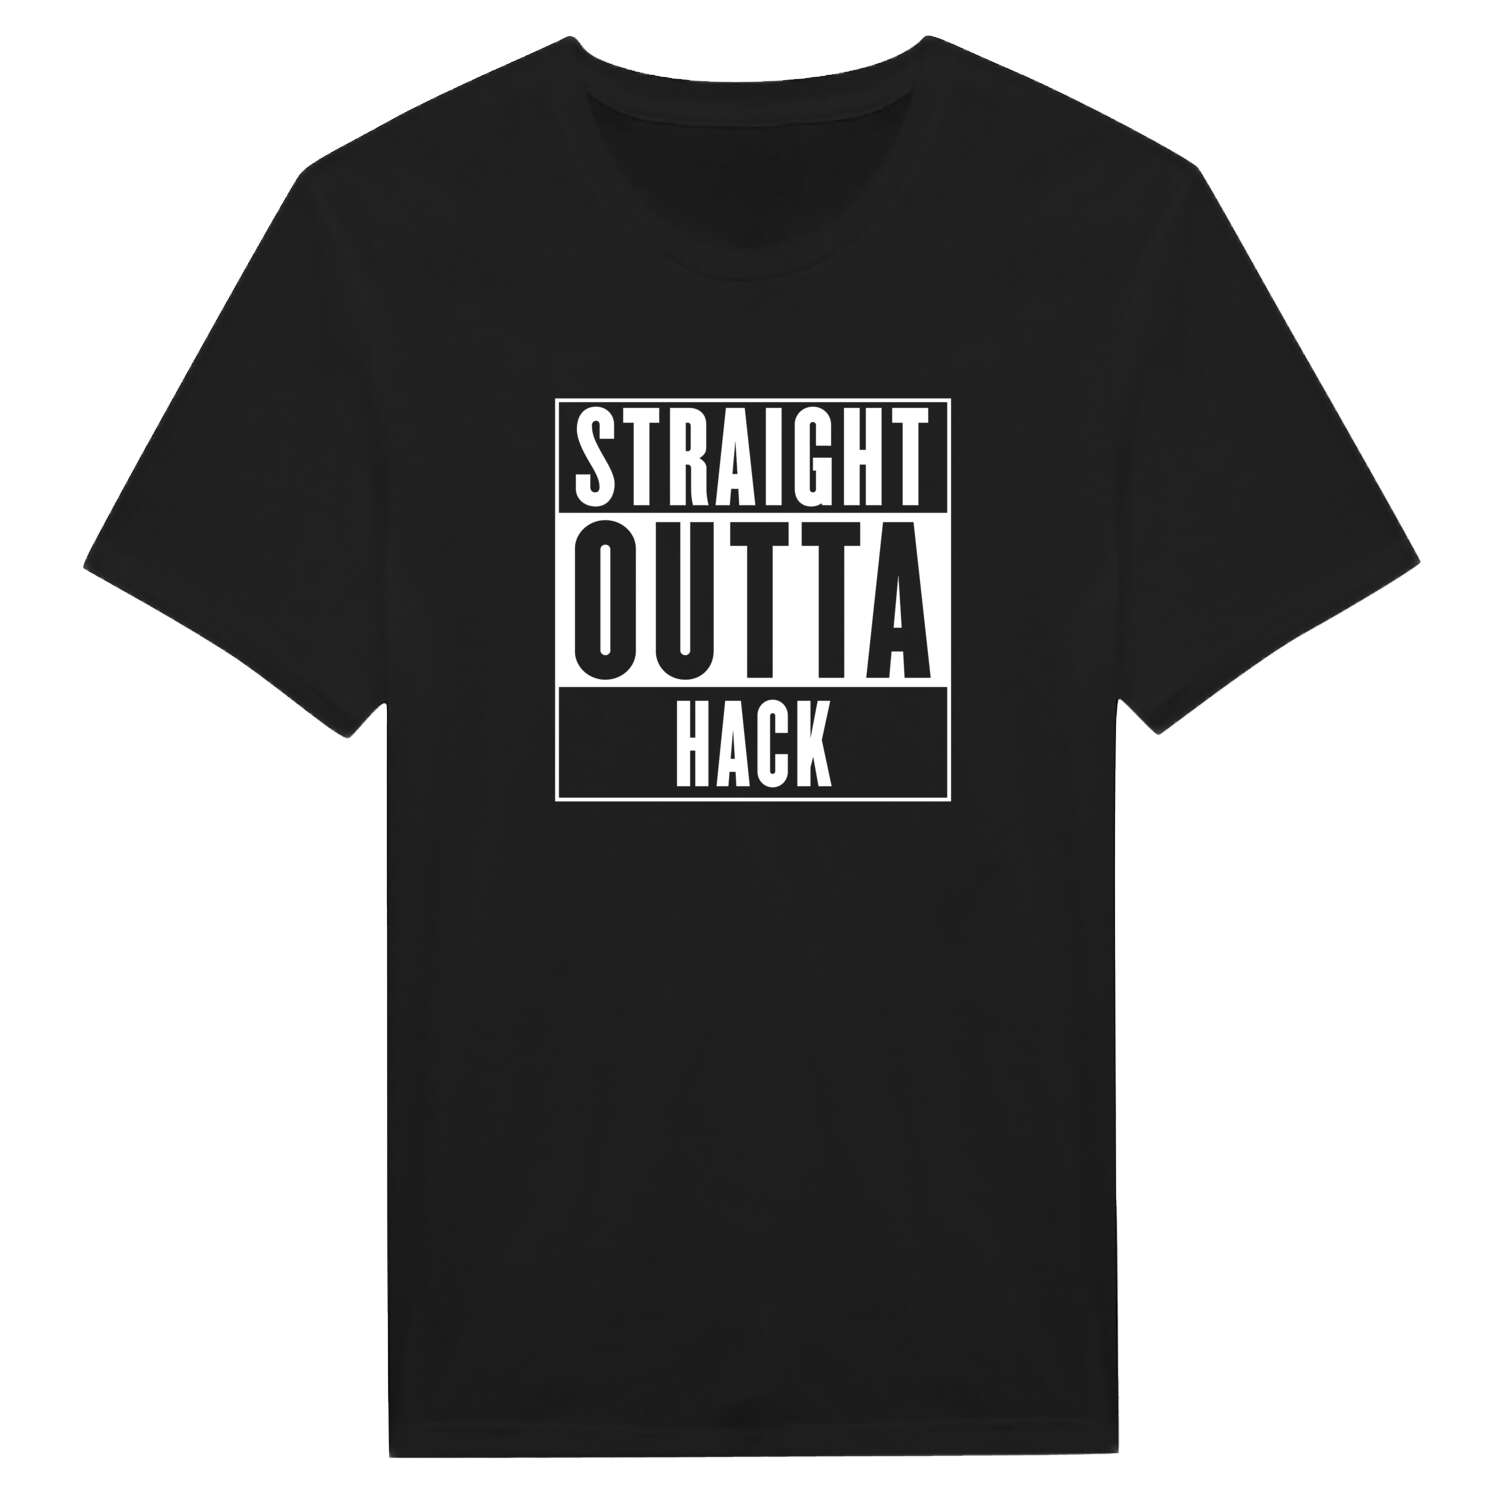 Hack T-Shirt »Straight Outta«